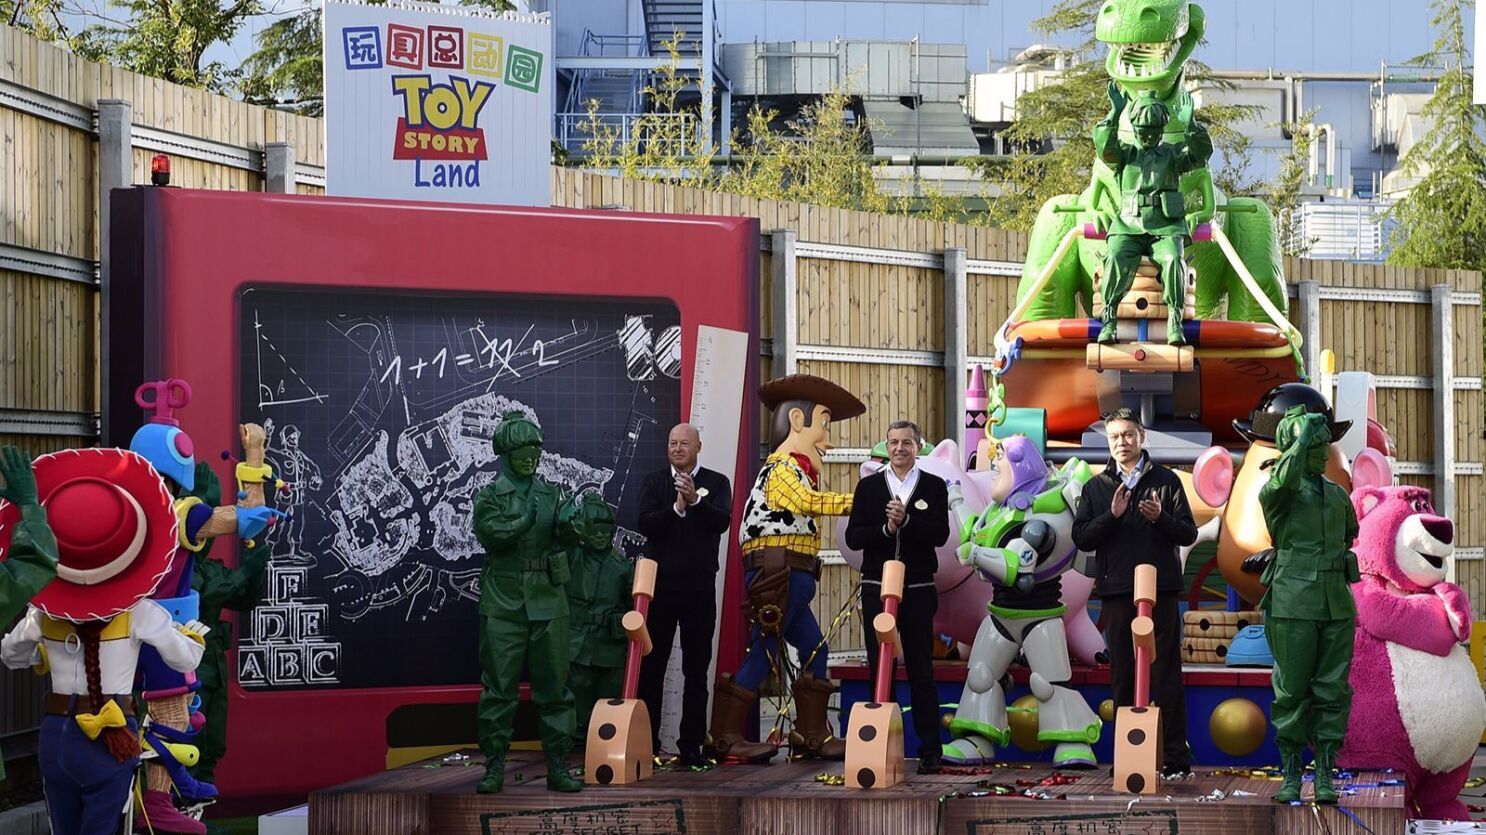 Construction Starts On Toy Story Land At Shanghai Disneyland Los Angeles Times